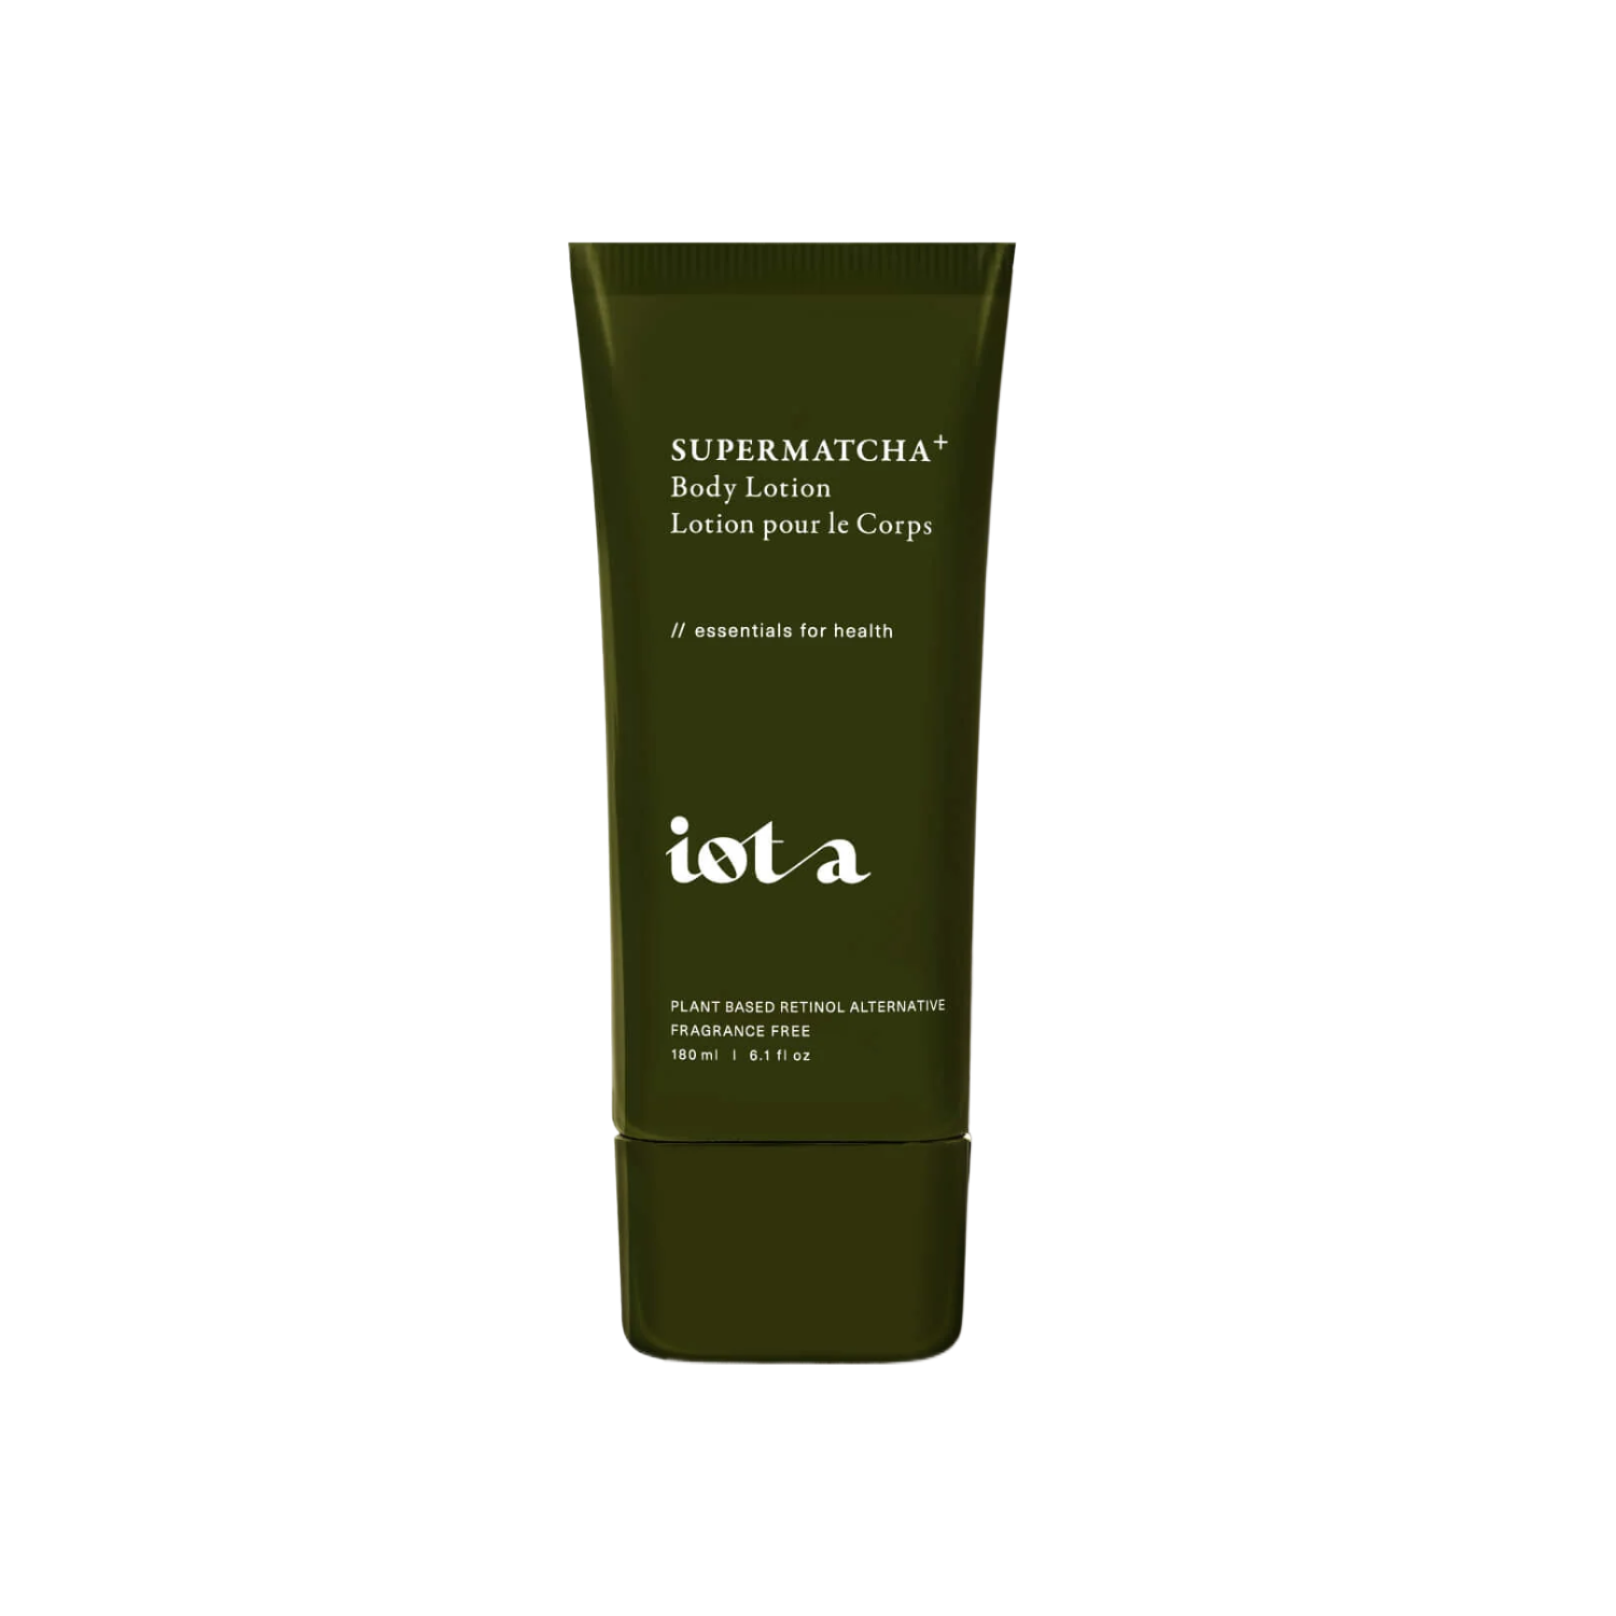 Load image into Gallery viewer, iota Supermatcha Body Lotion+
